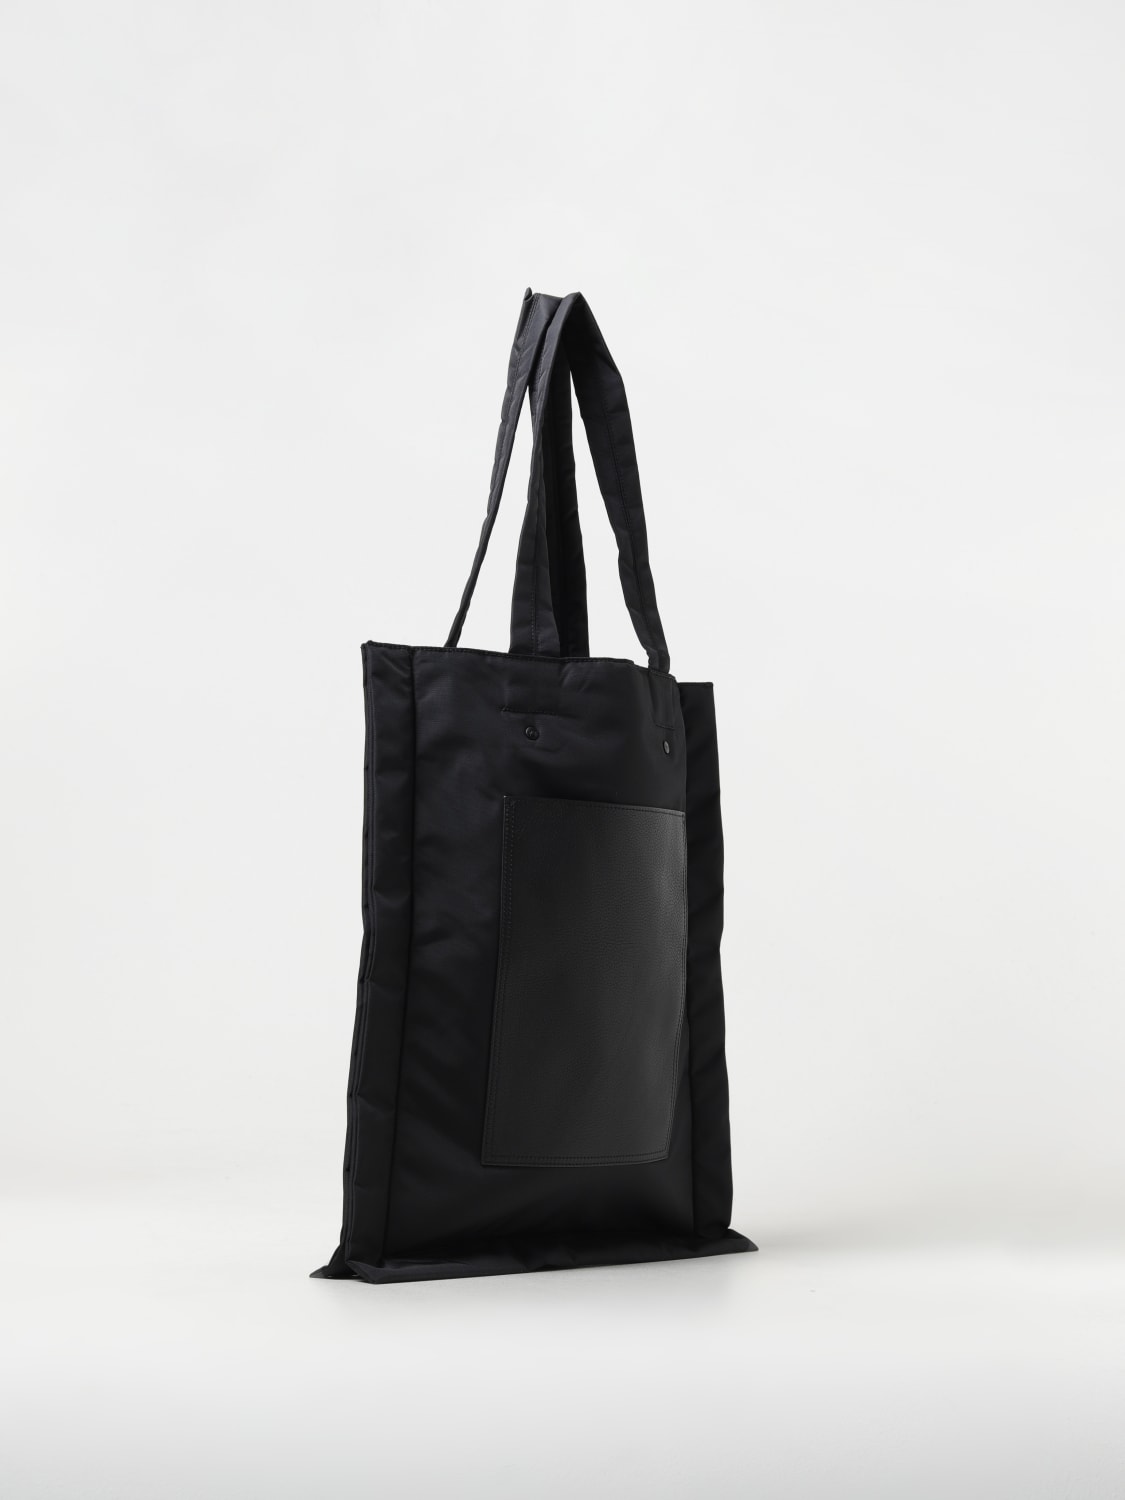 Y-3UTILITYTOTE【完全新品】 Y-3(ワイスリー)ナイロントートバッグ ショルダーバッグ